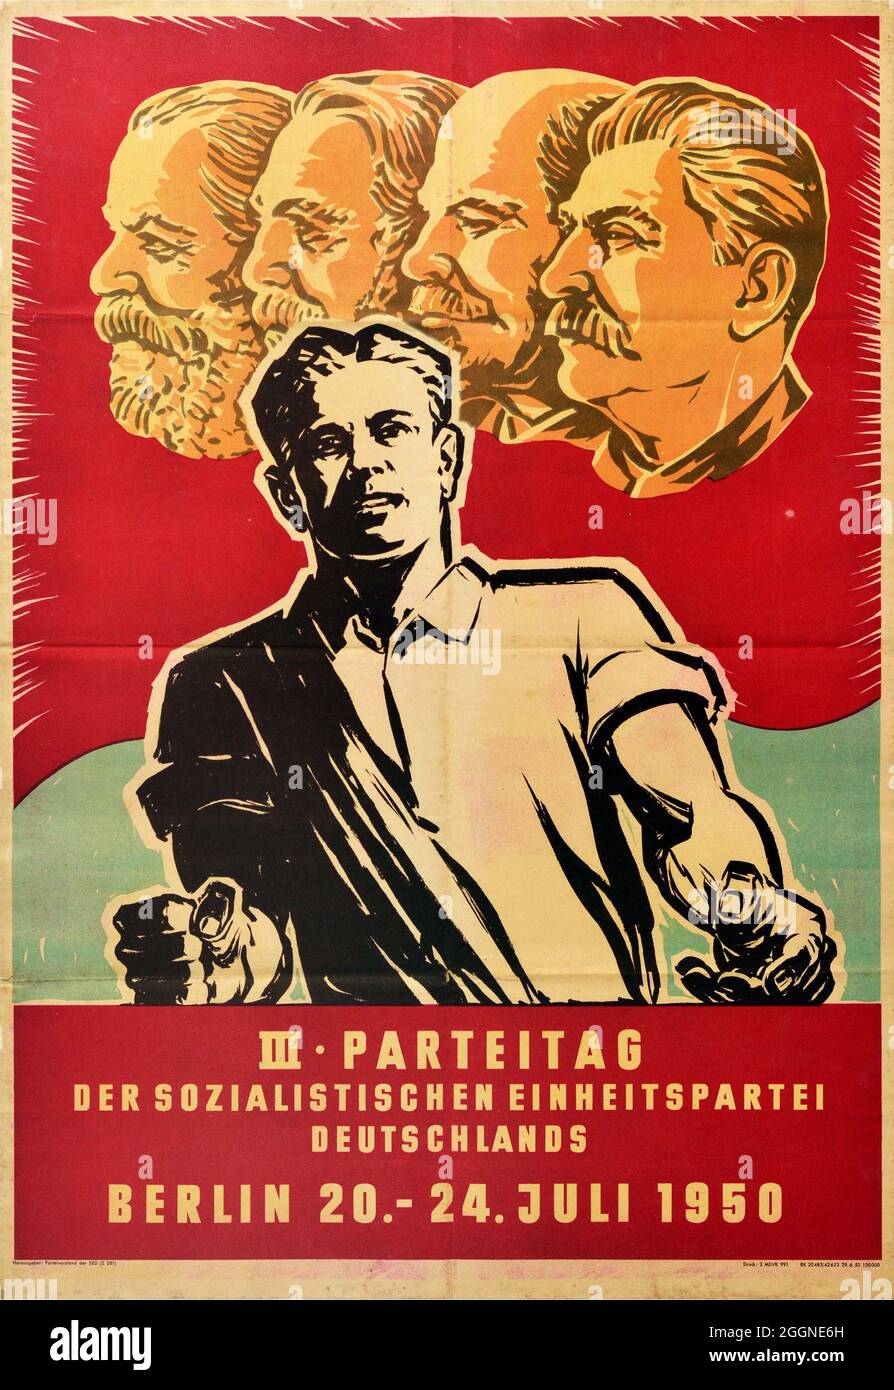 III Congress of the Socialist Unity Party of Germany. Berlin 20-24 July 1950. Museum: PRIVATE COLLECTION. Author: ANONYMOUS. Stock Photo